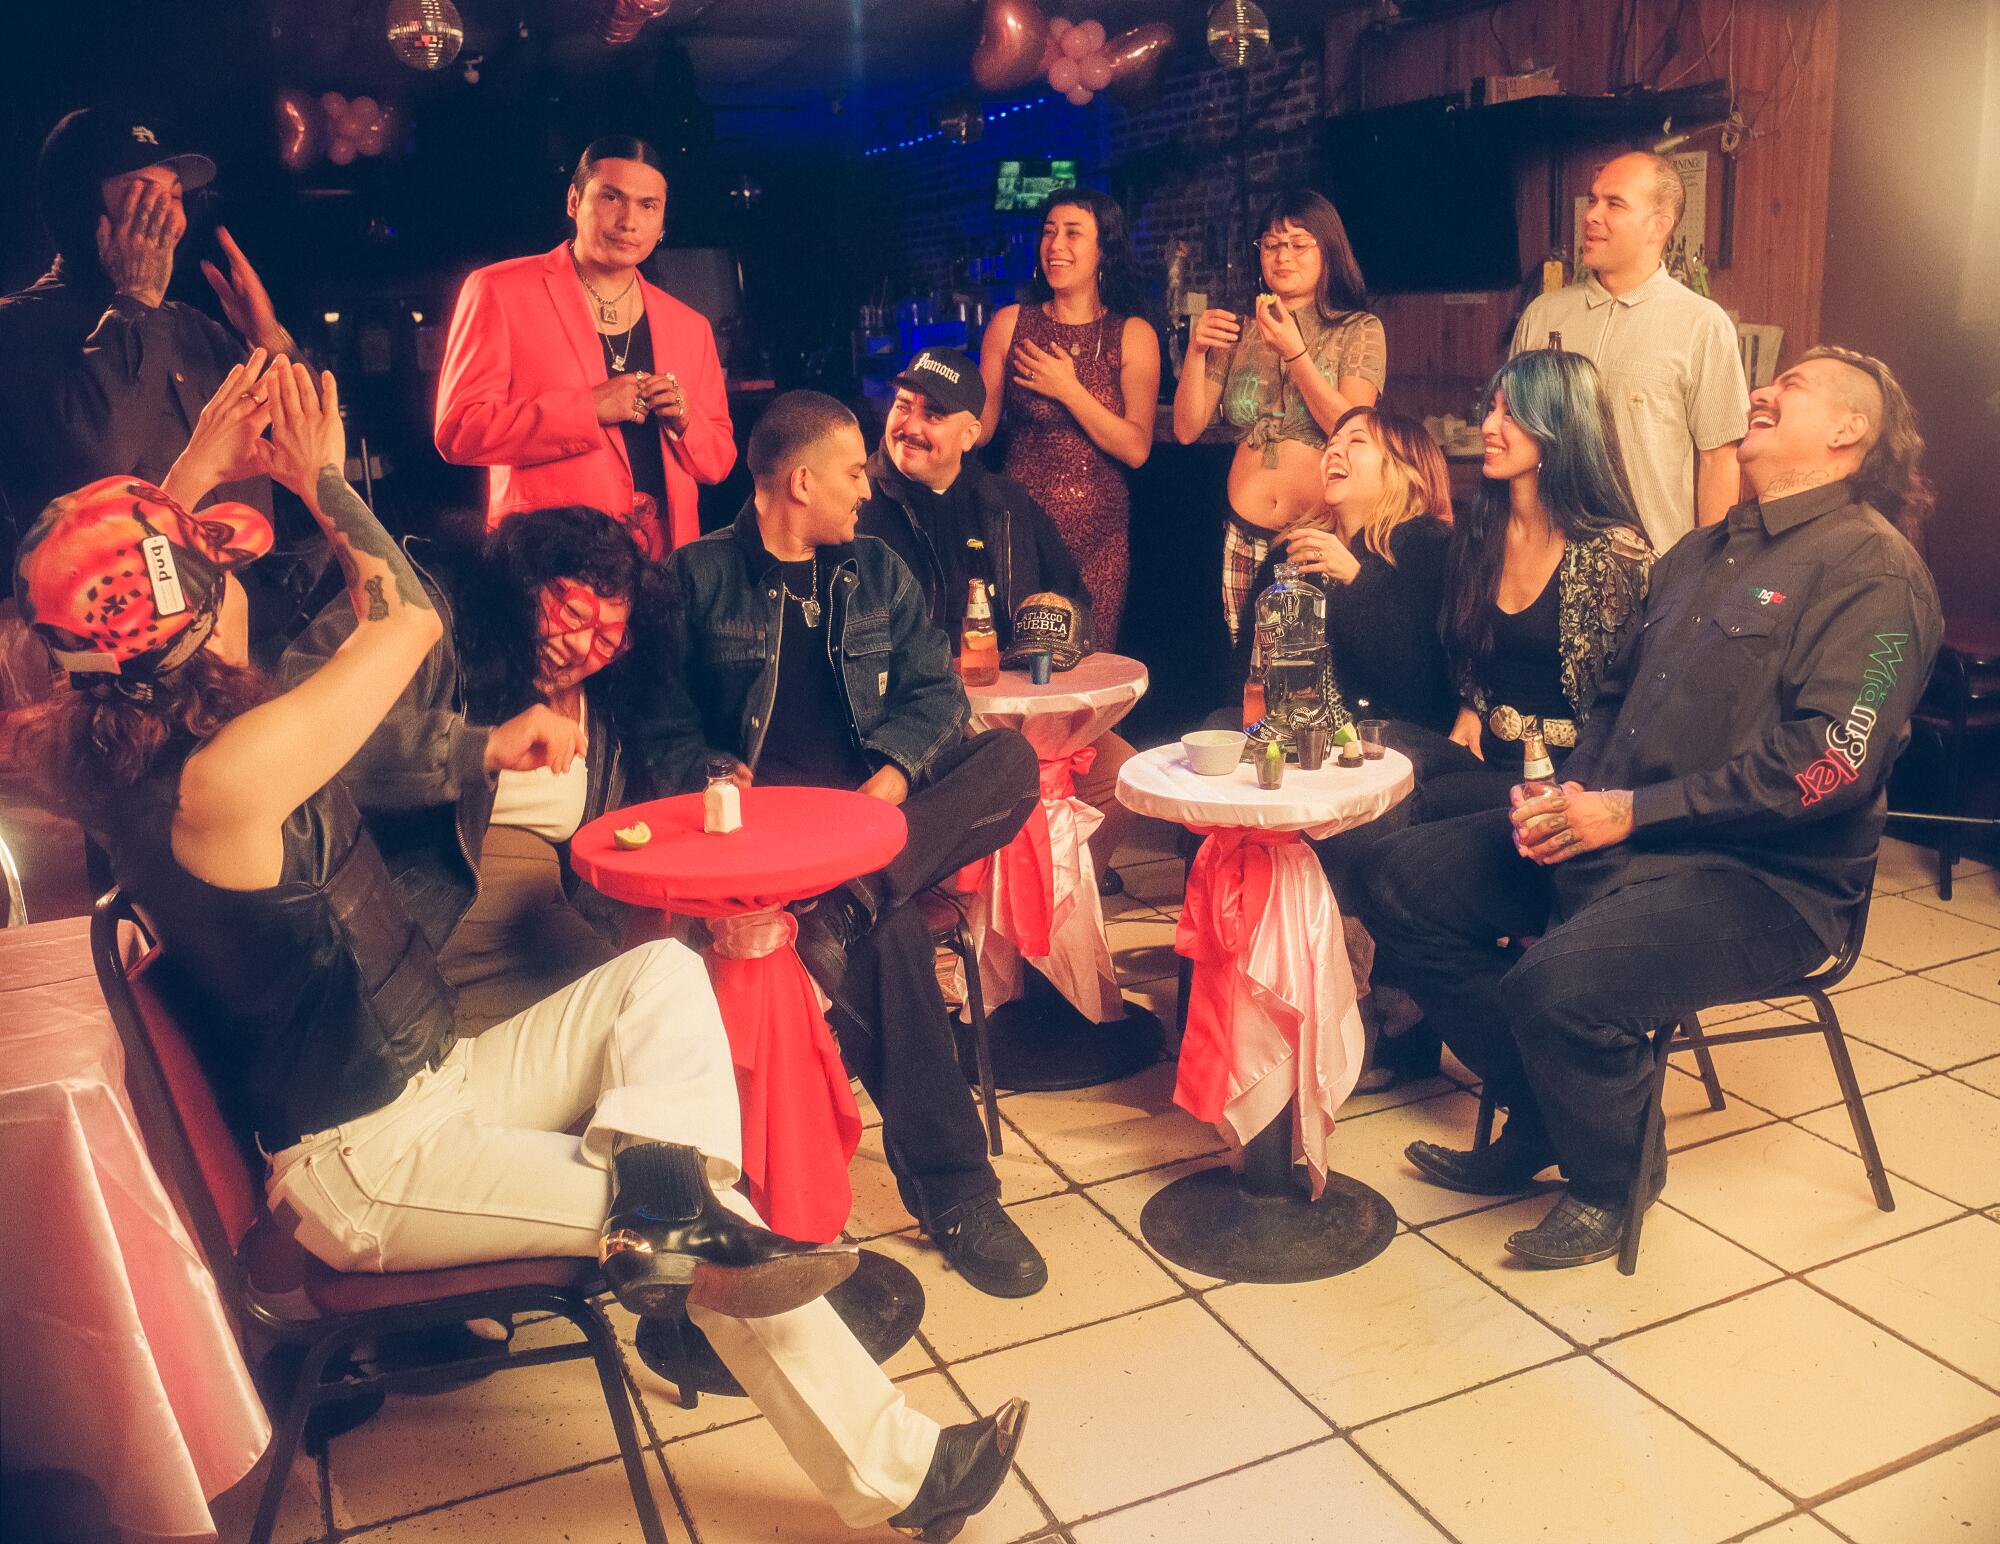 A group of people have fun together around a cluster of tables at a bar.